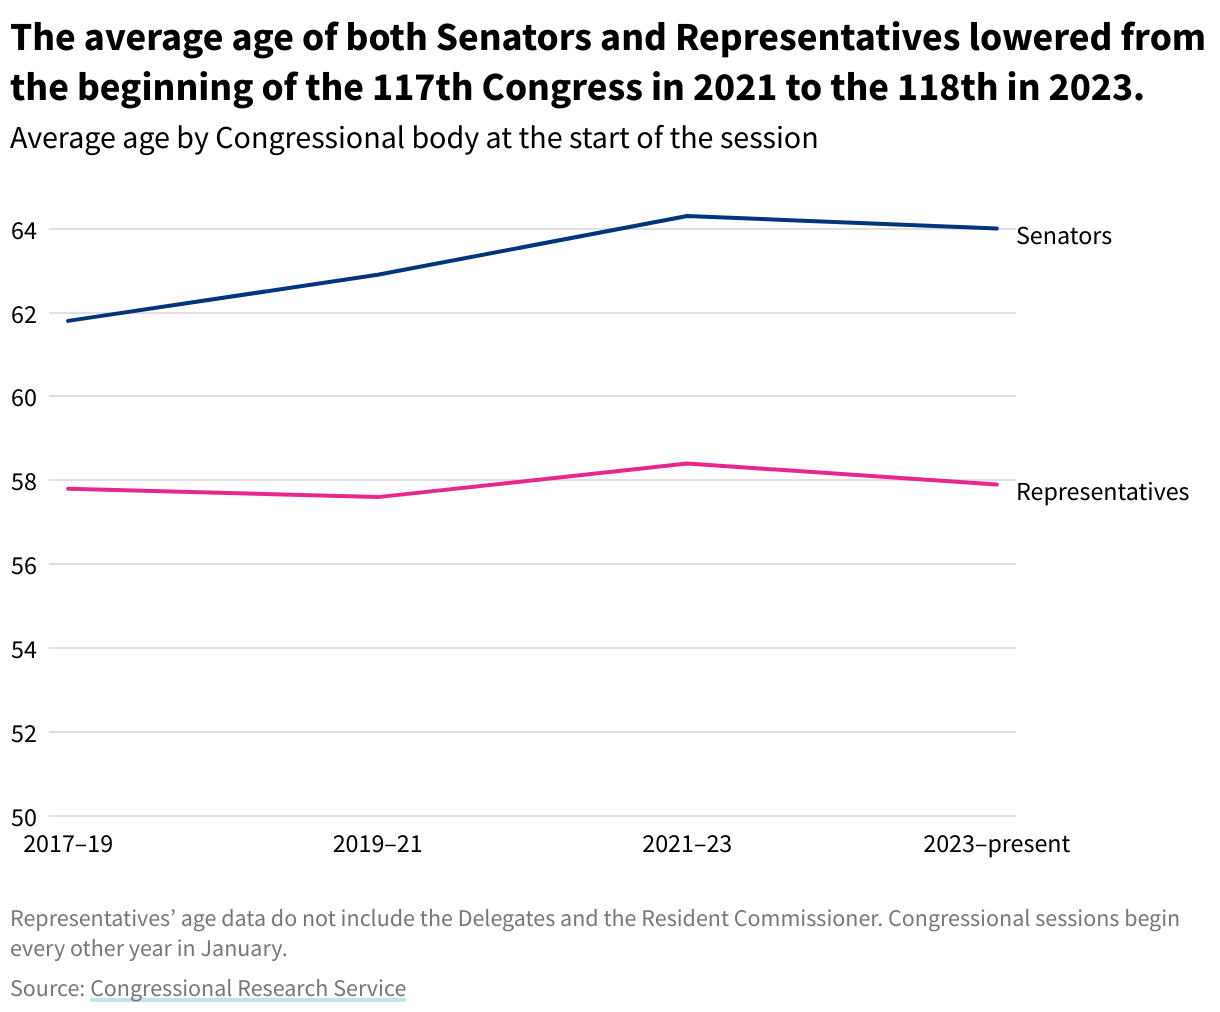 A grouped column chart showing average age of Senators and Representatives at the start of each of the last four Congressional sessions. The average age of both Senators and Representatives lowered from the beginning of the 117th Congress in 2021 to the 118th in 2023.